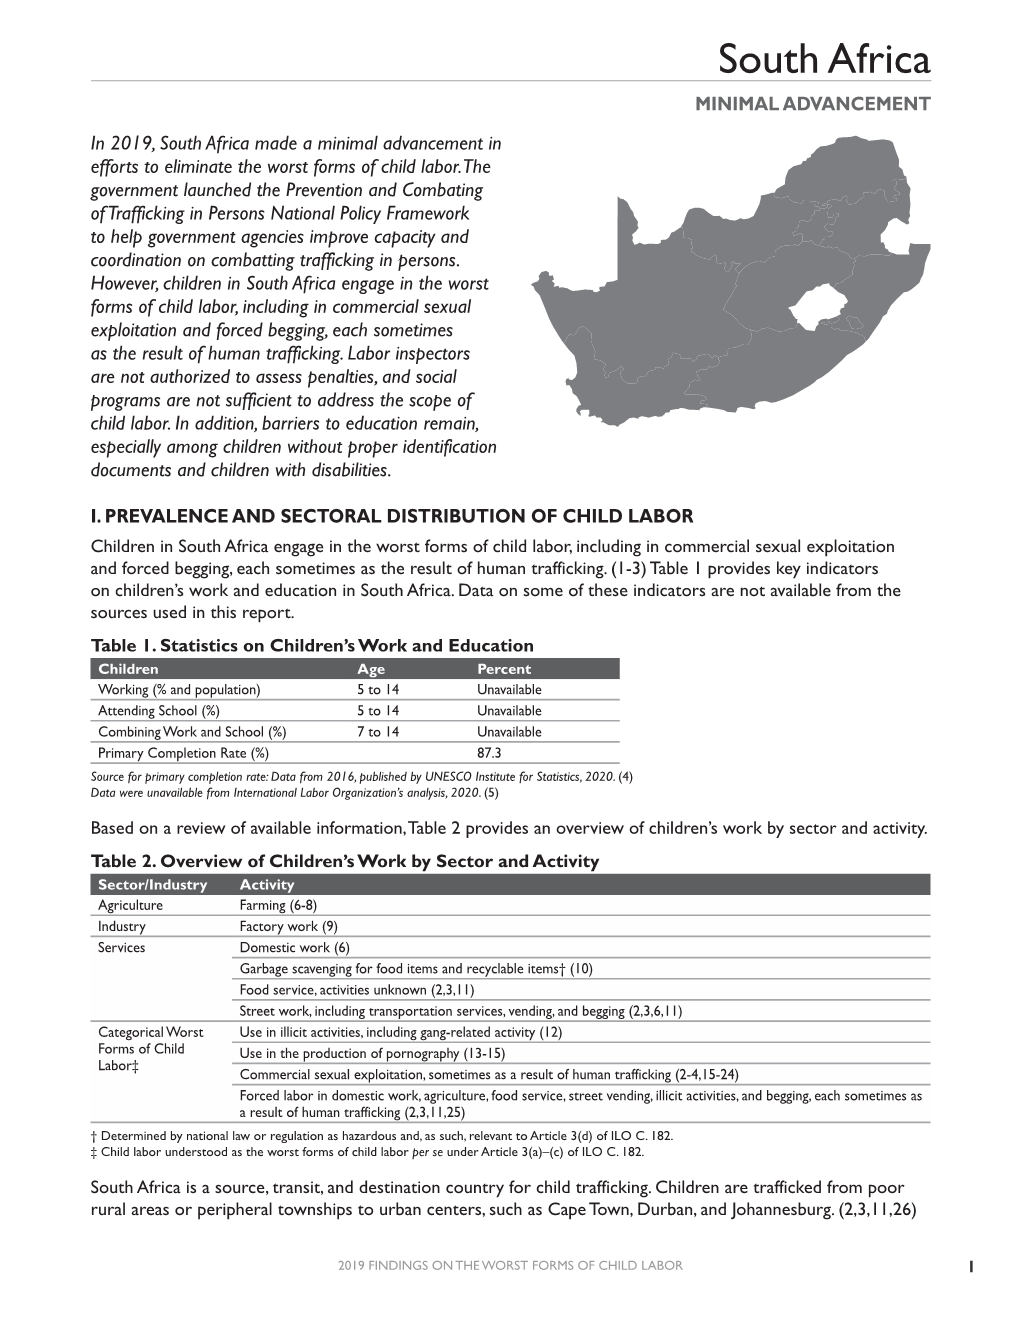 2019 Findings on the Worst Forms of Child Labor: South Africa